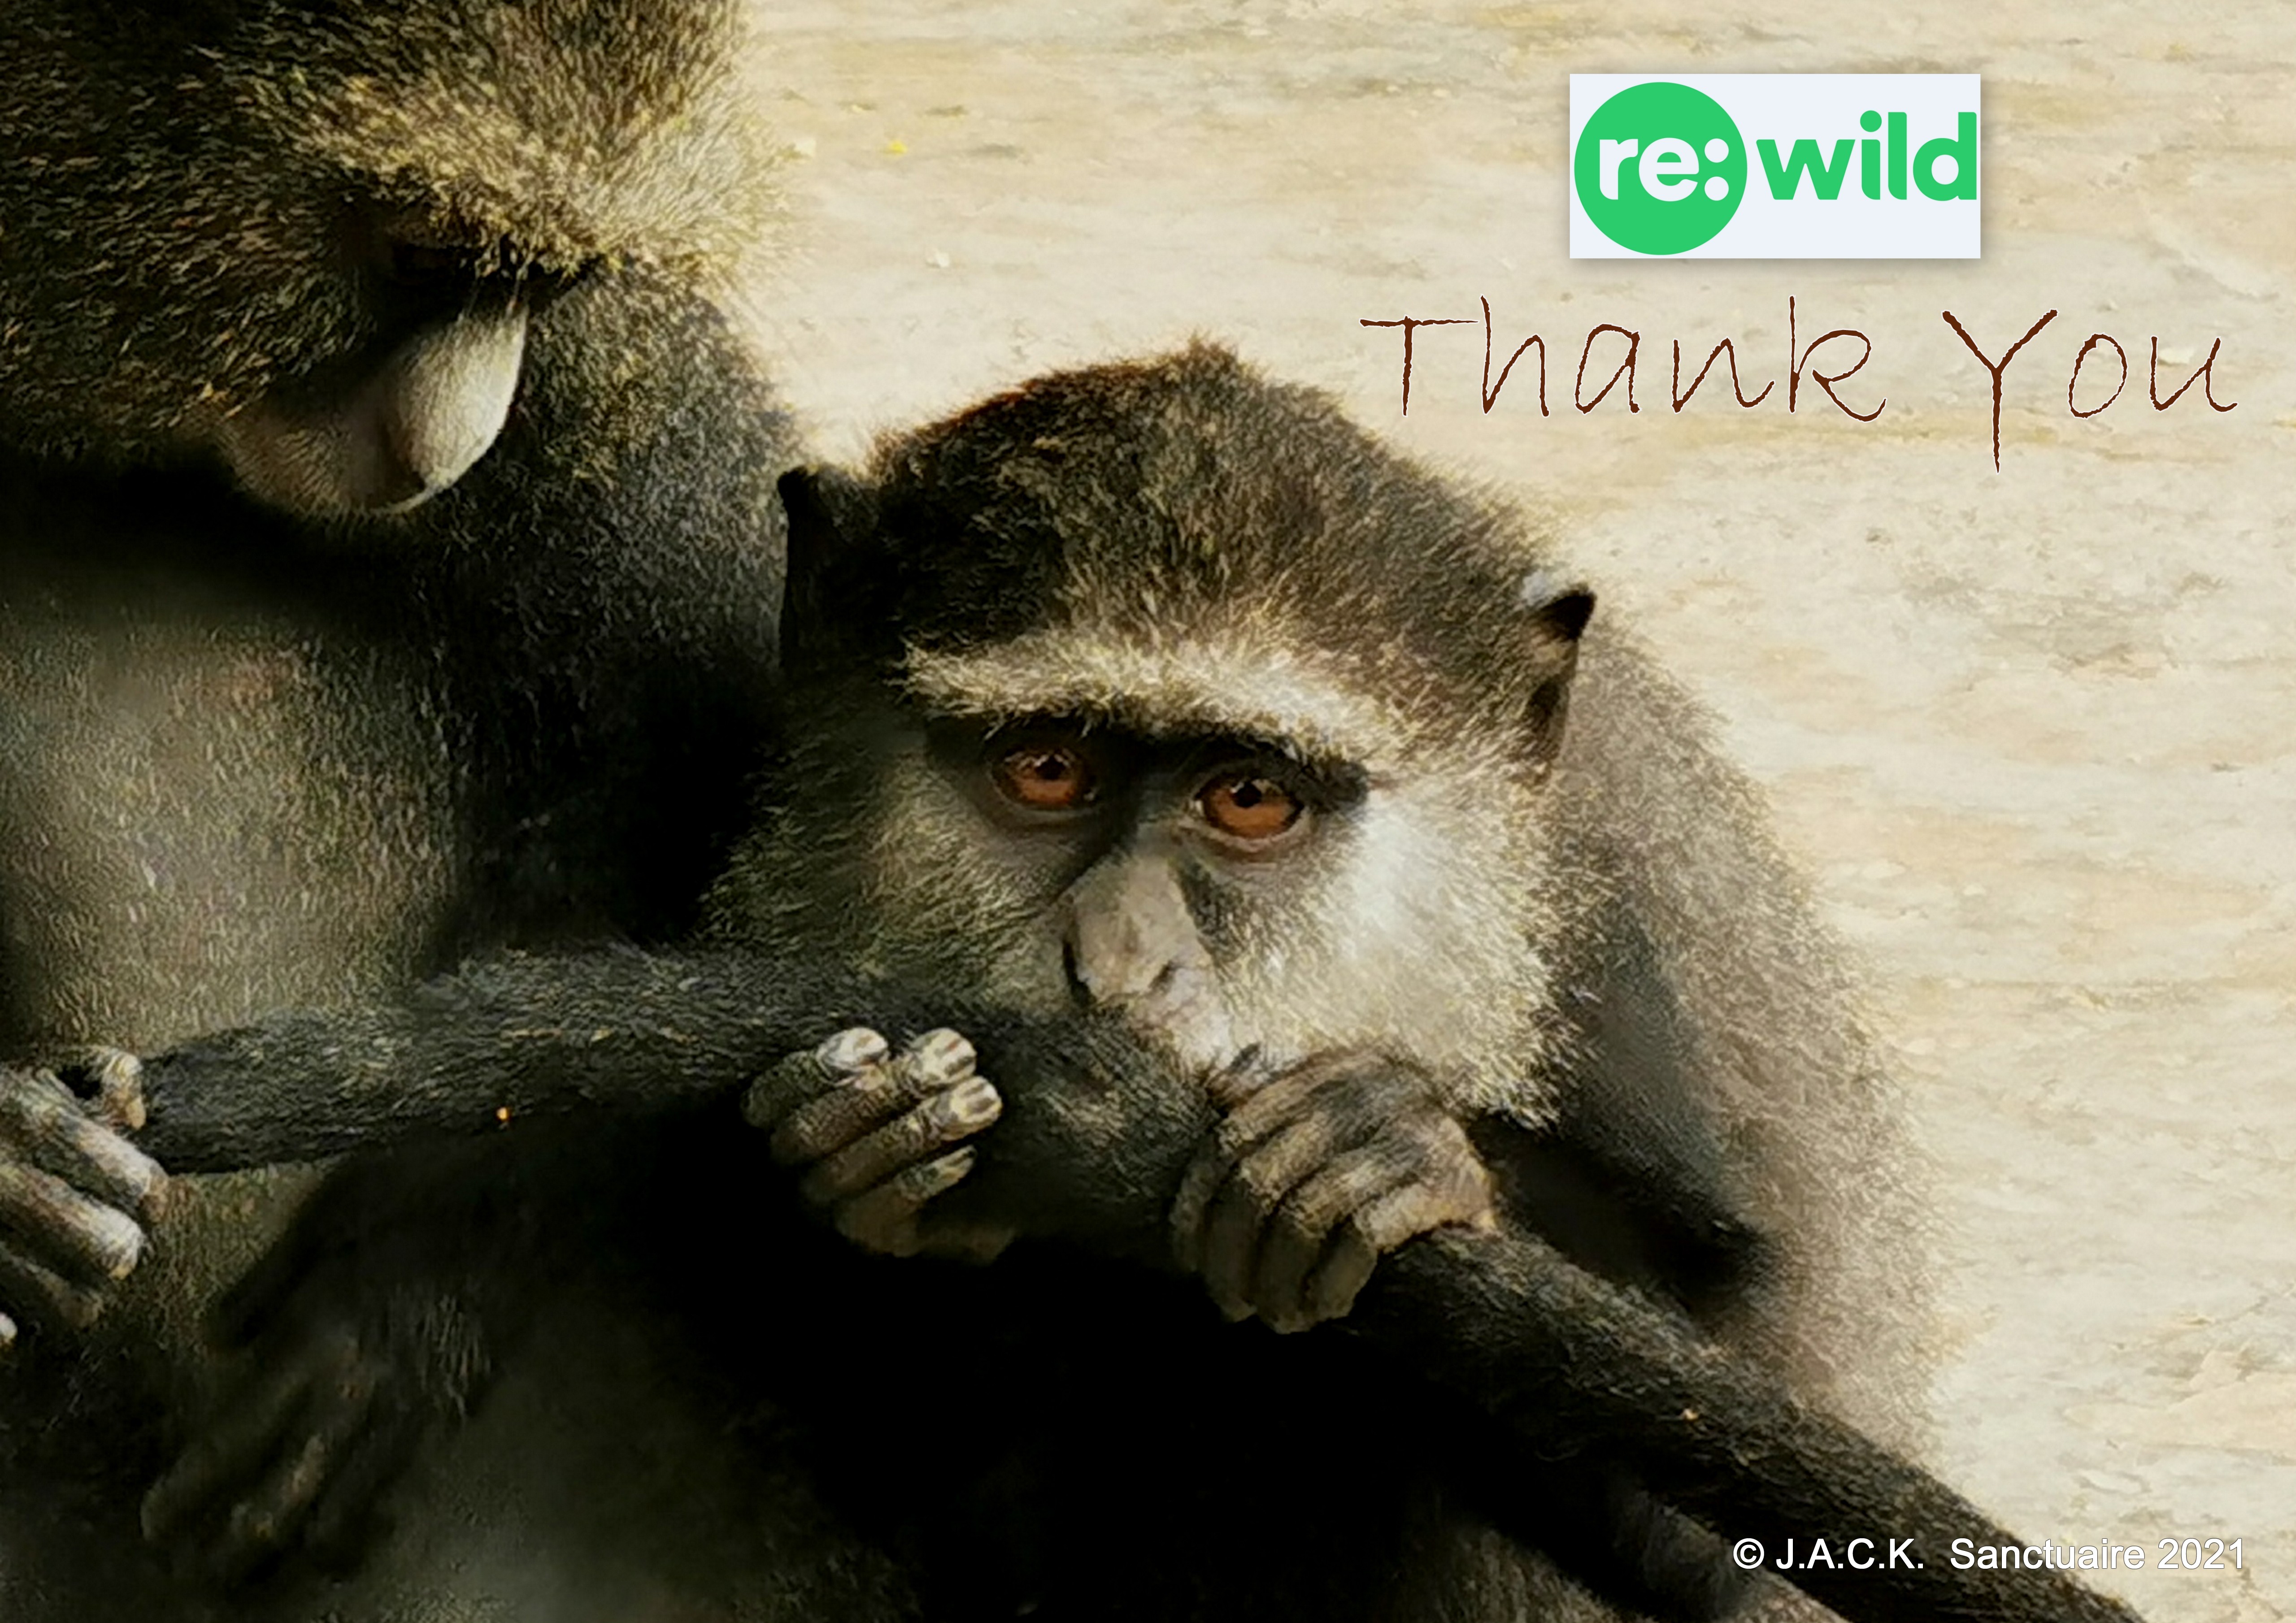 Great support from Re:Wild for the monkeys repatriated from Zimbabwe